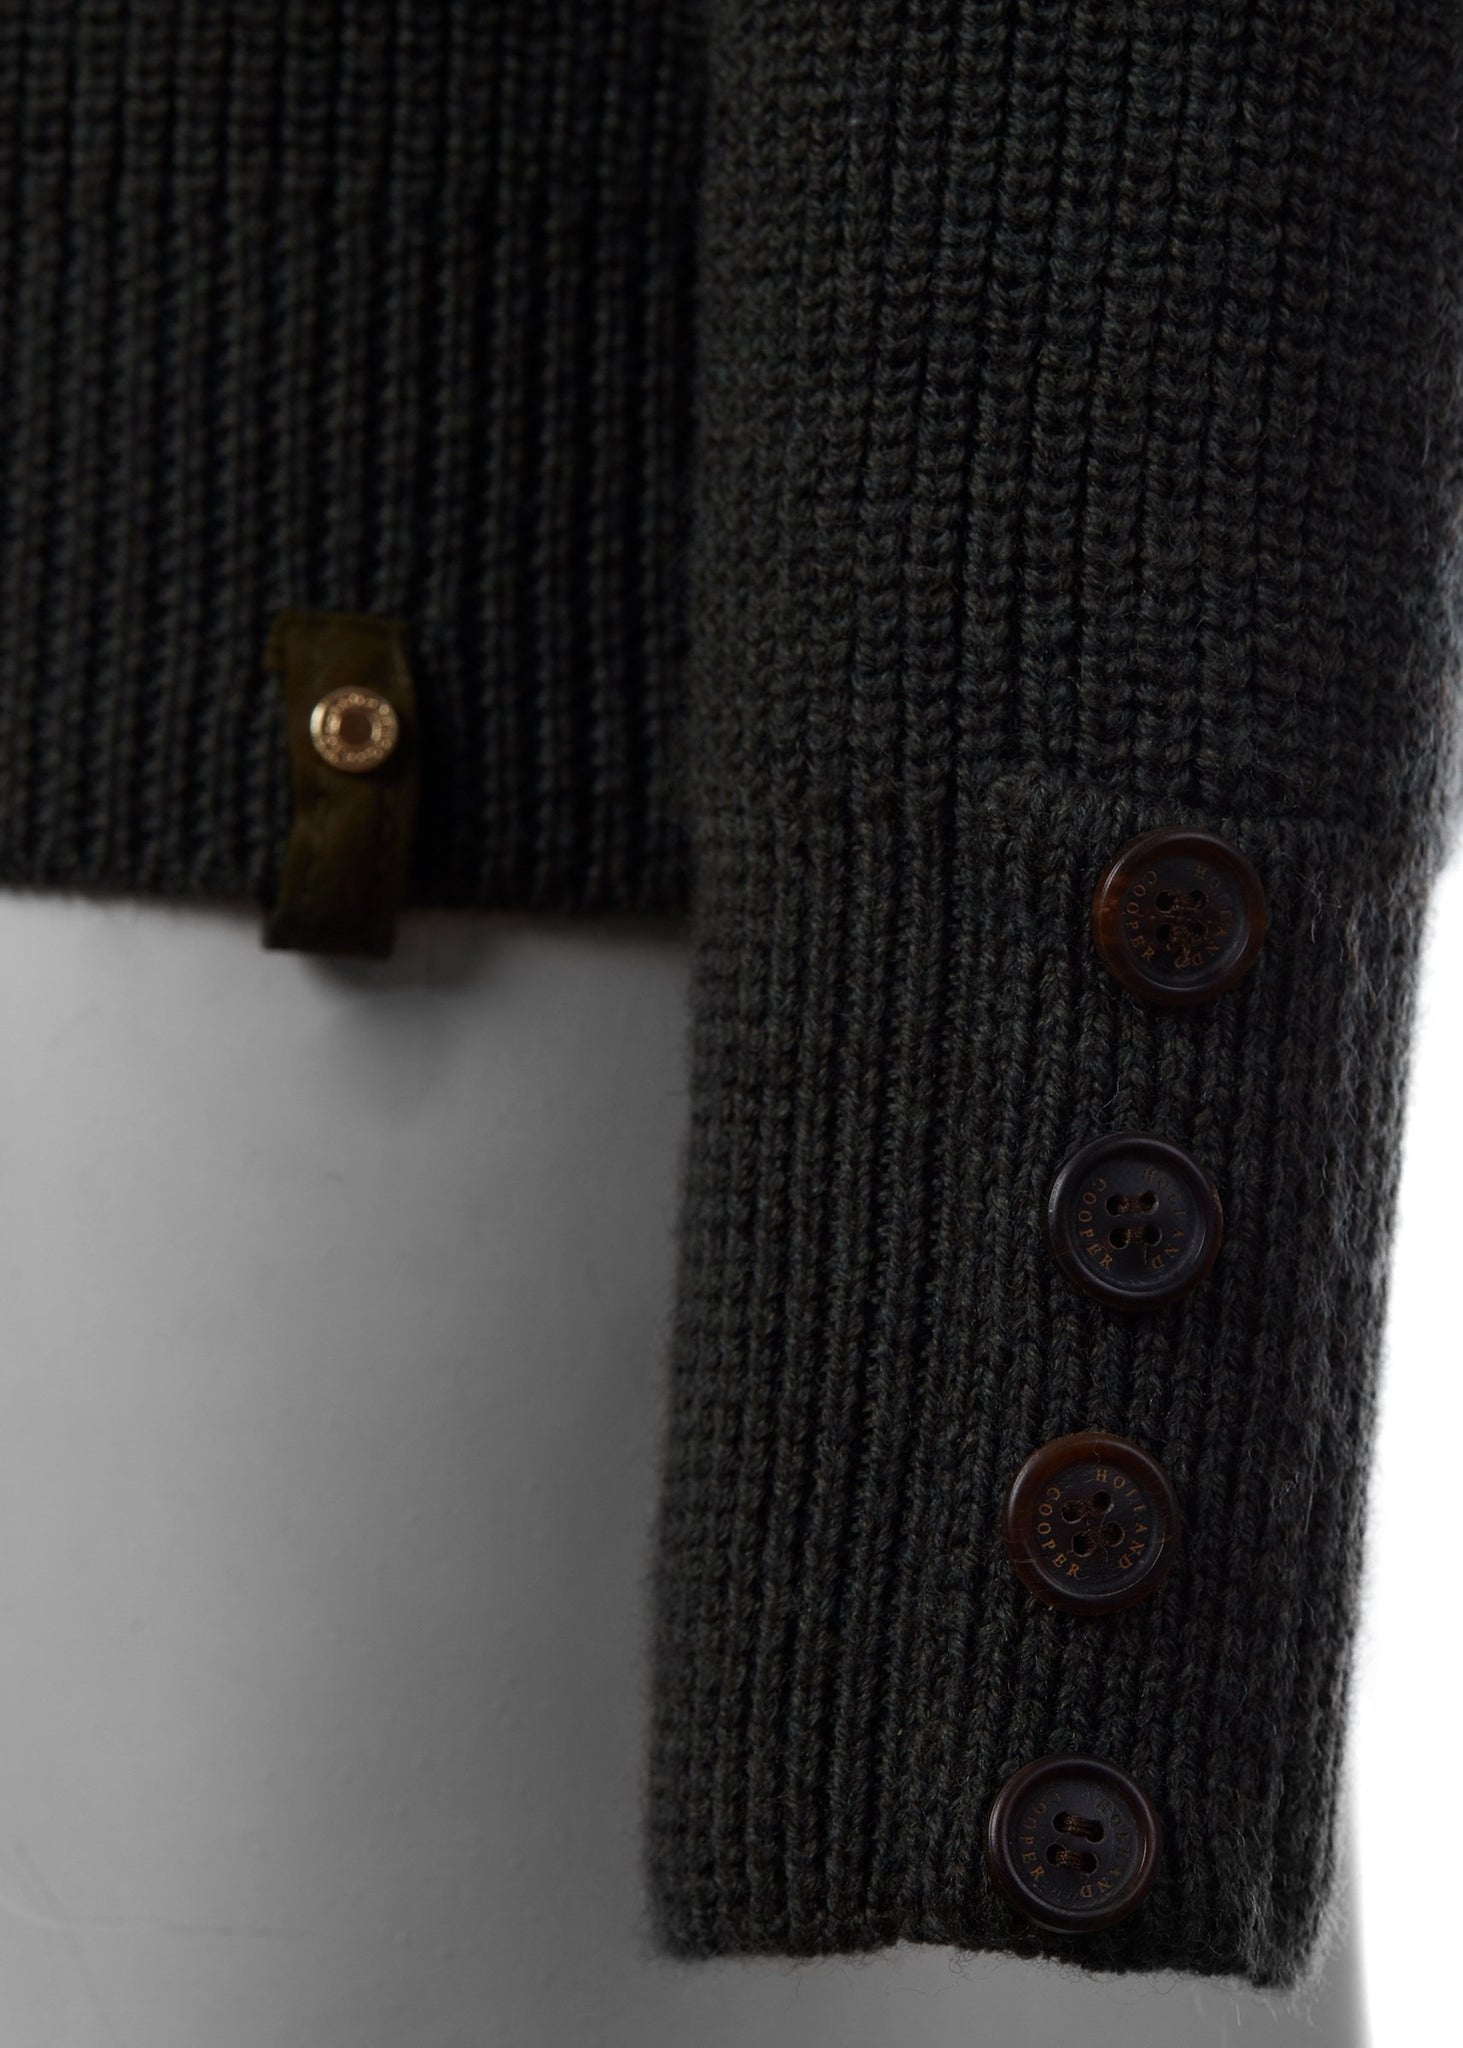 horn button detail on cuffs of classic crew neck slim fit merino wool jumper in forest green with brown faux suede gunpatch on shoulder and quilted elbow patches in the same brown suede material